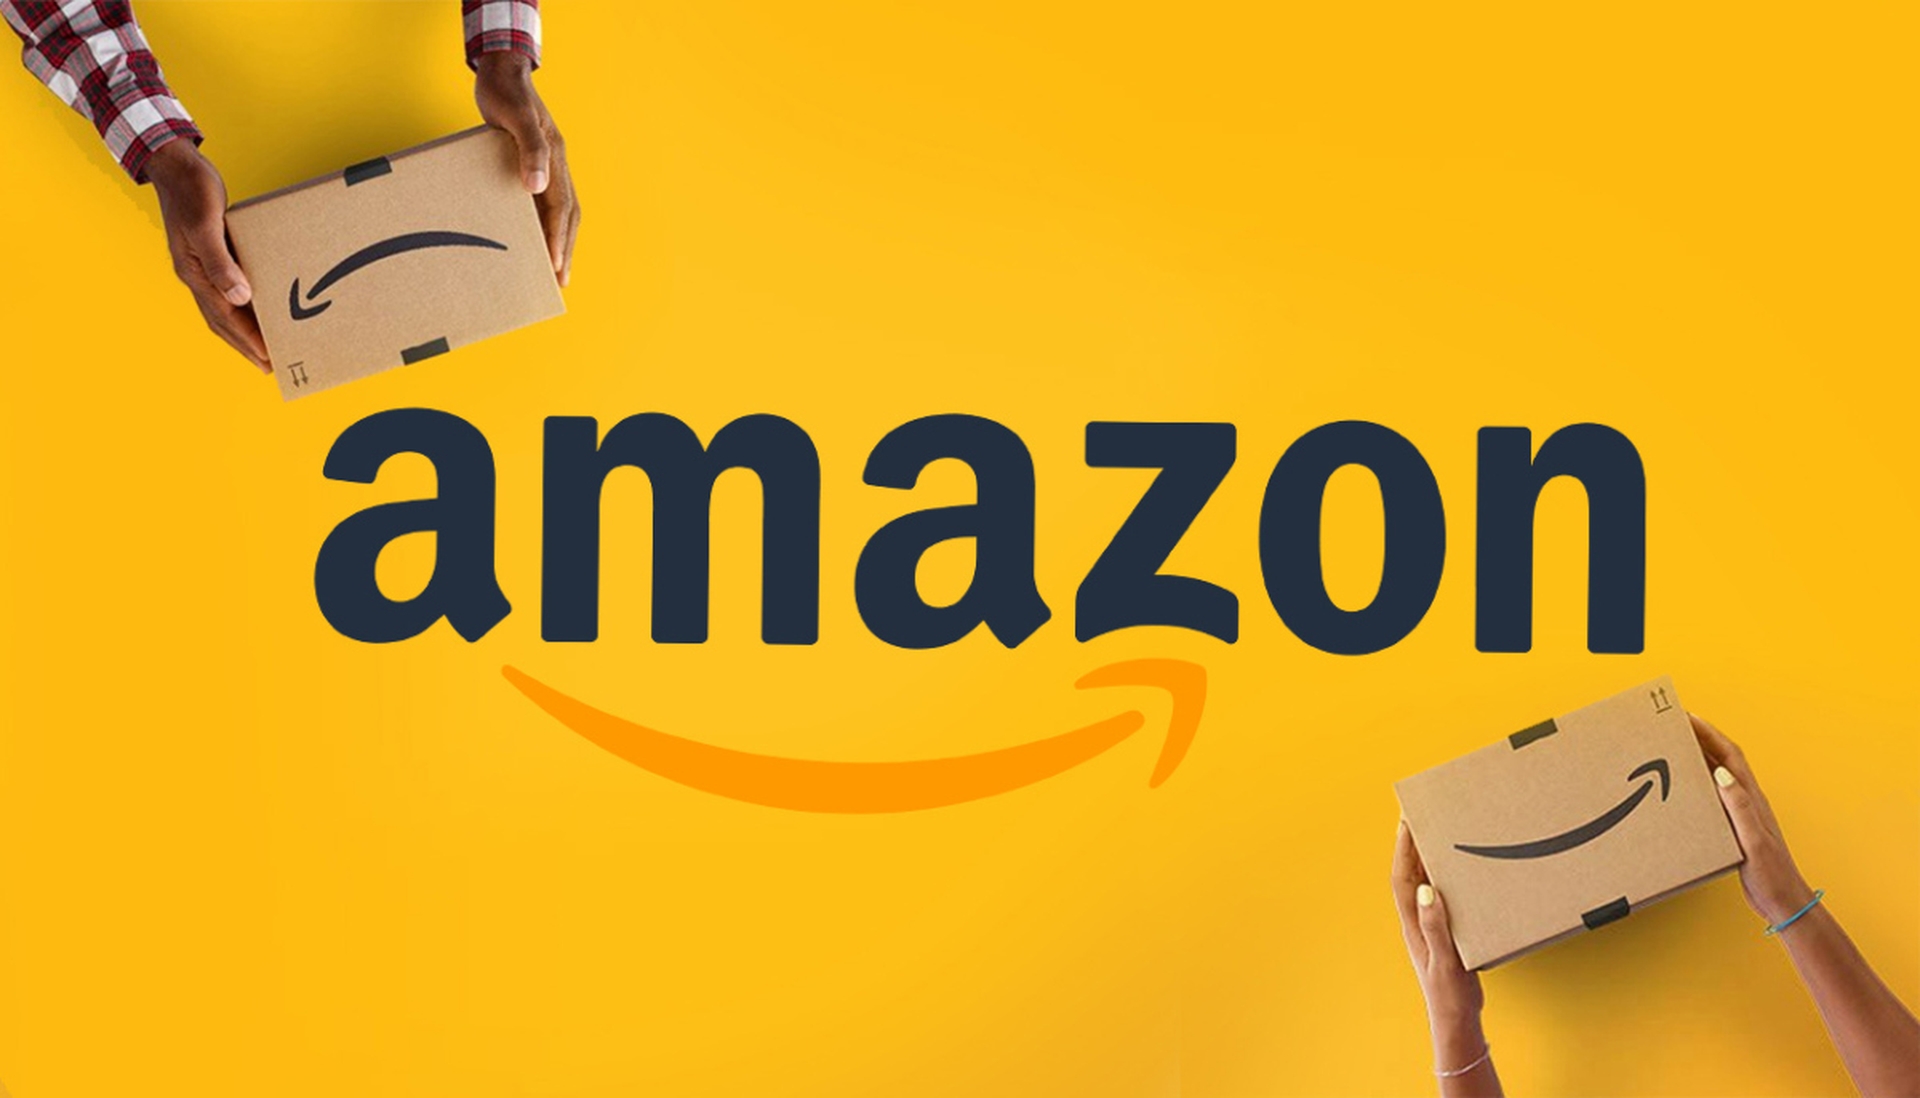 In this article, we are going to be going over how to logout from Amazon app, so you can safely log out of the shopping site on any device.